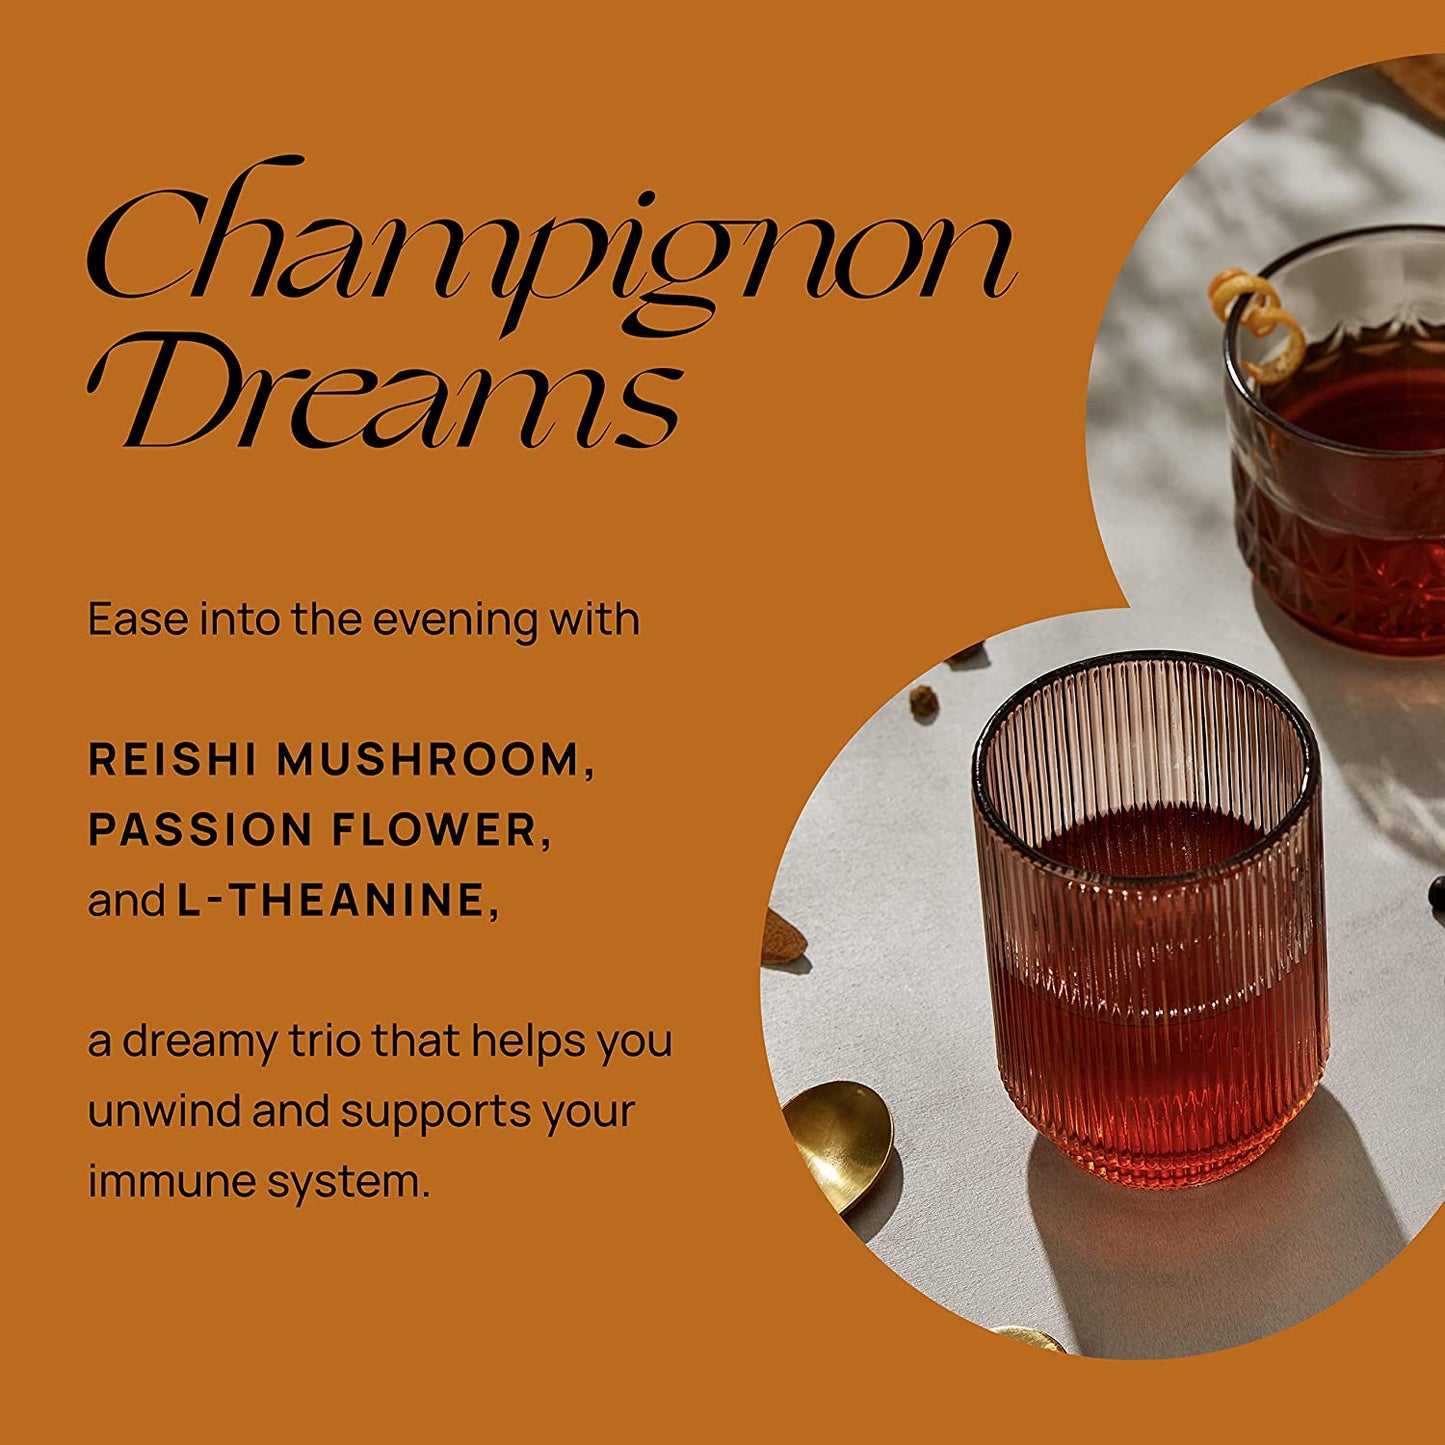 De Soi Champignon Dreams Canada - Non-Alcoholic sparkling aperitif - helps you unwind and supports your immune system - adaptogens - reishi mushroom, passion flower, L-theanine